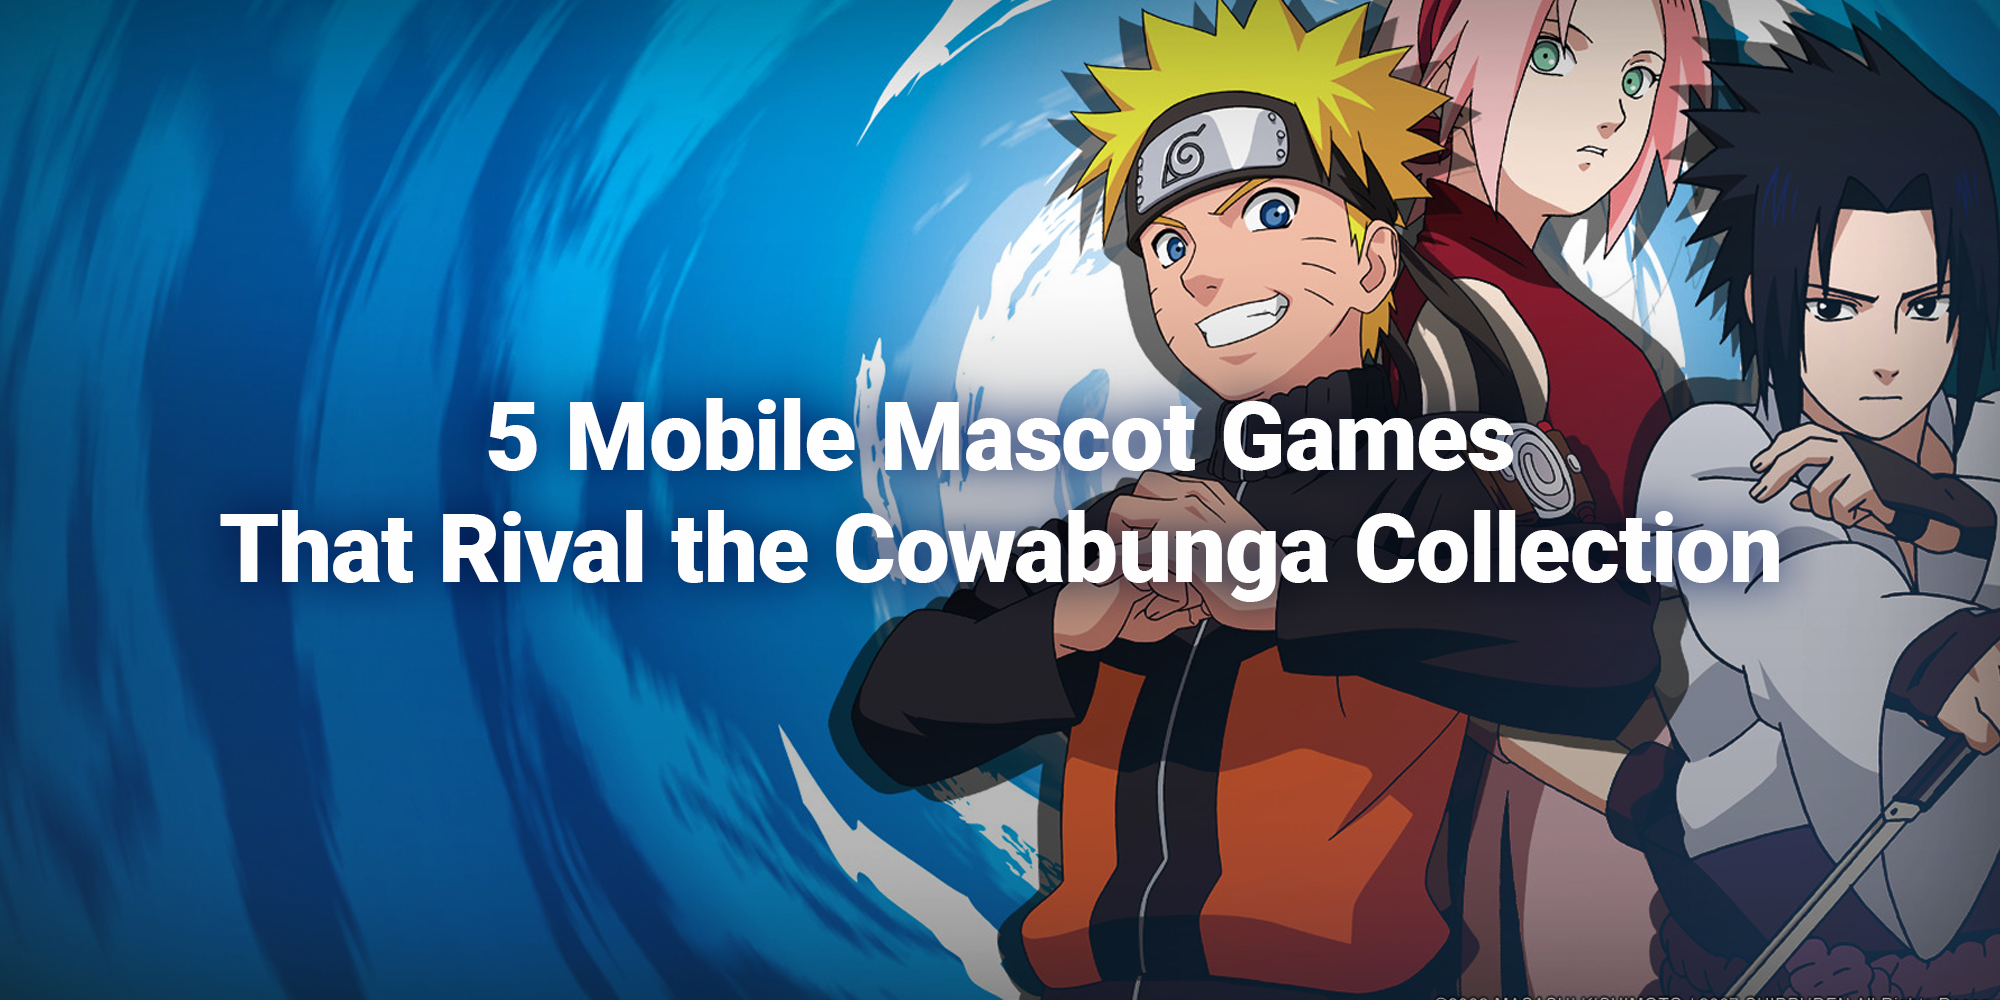 Naruto Mobile - Tutorial for English-Speaking Players - The Basics Part 1 